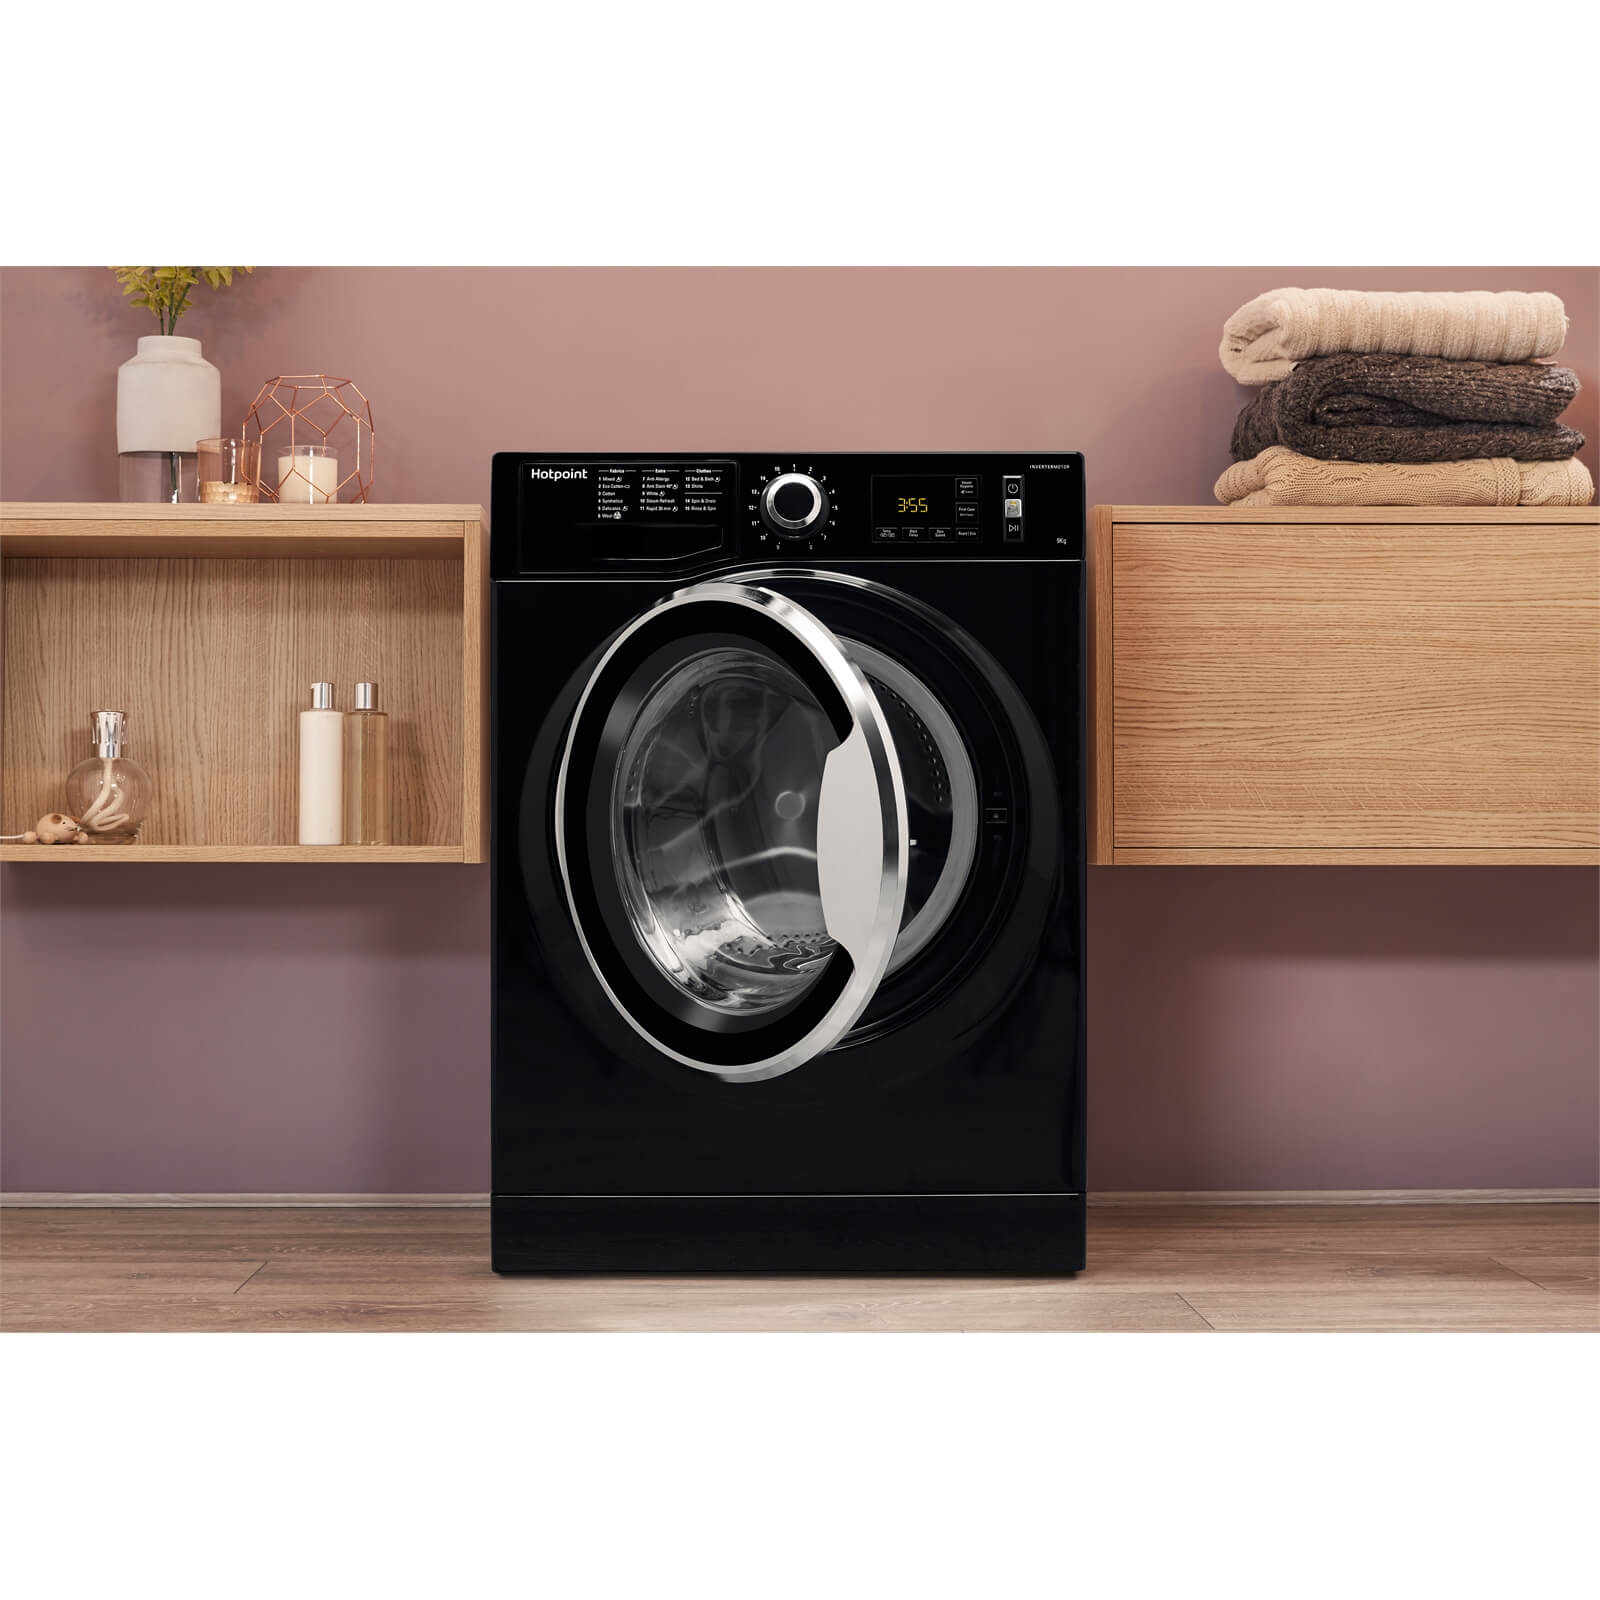 Hotpoint ActiveCare NM11 946 BC A Washing Machine - Black